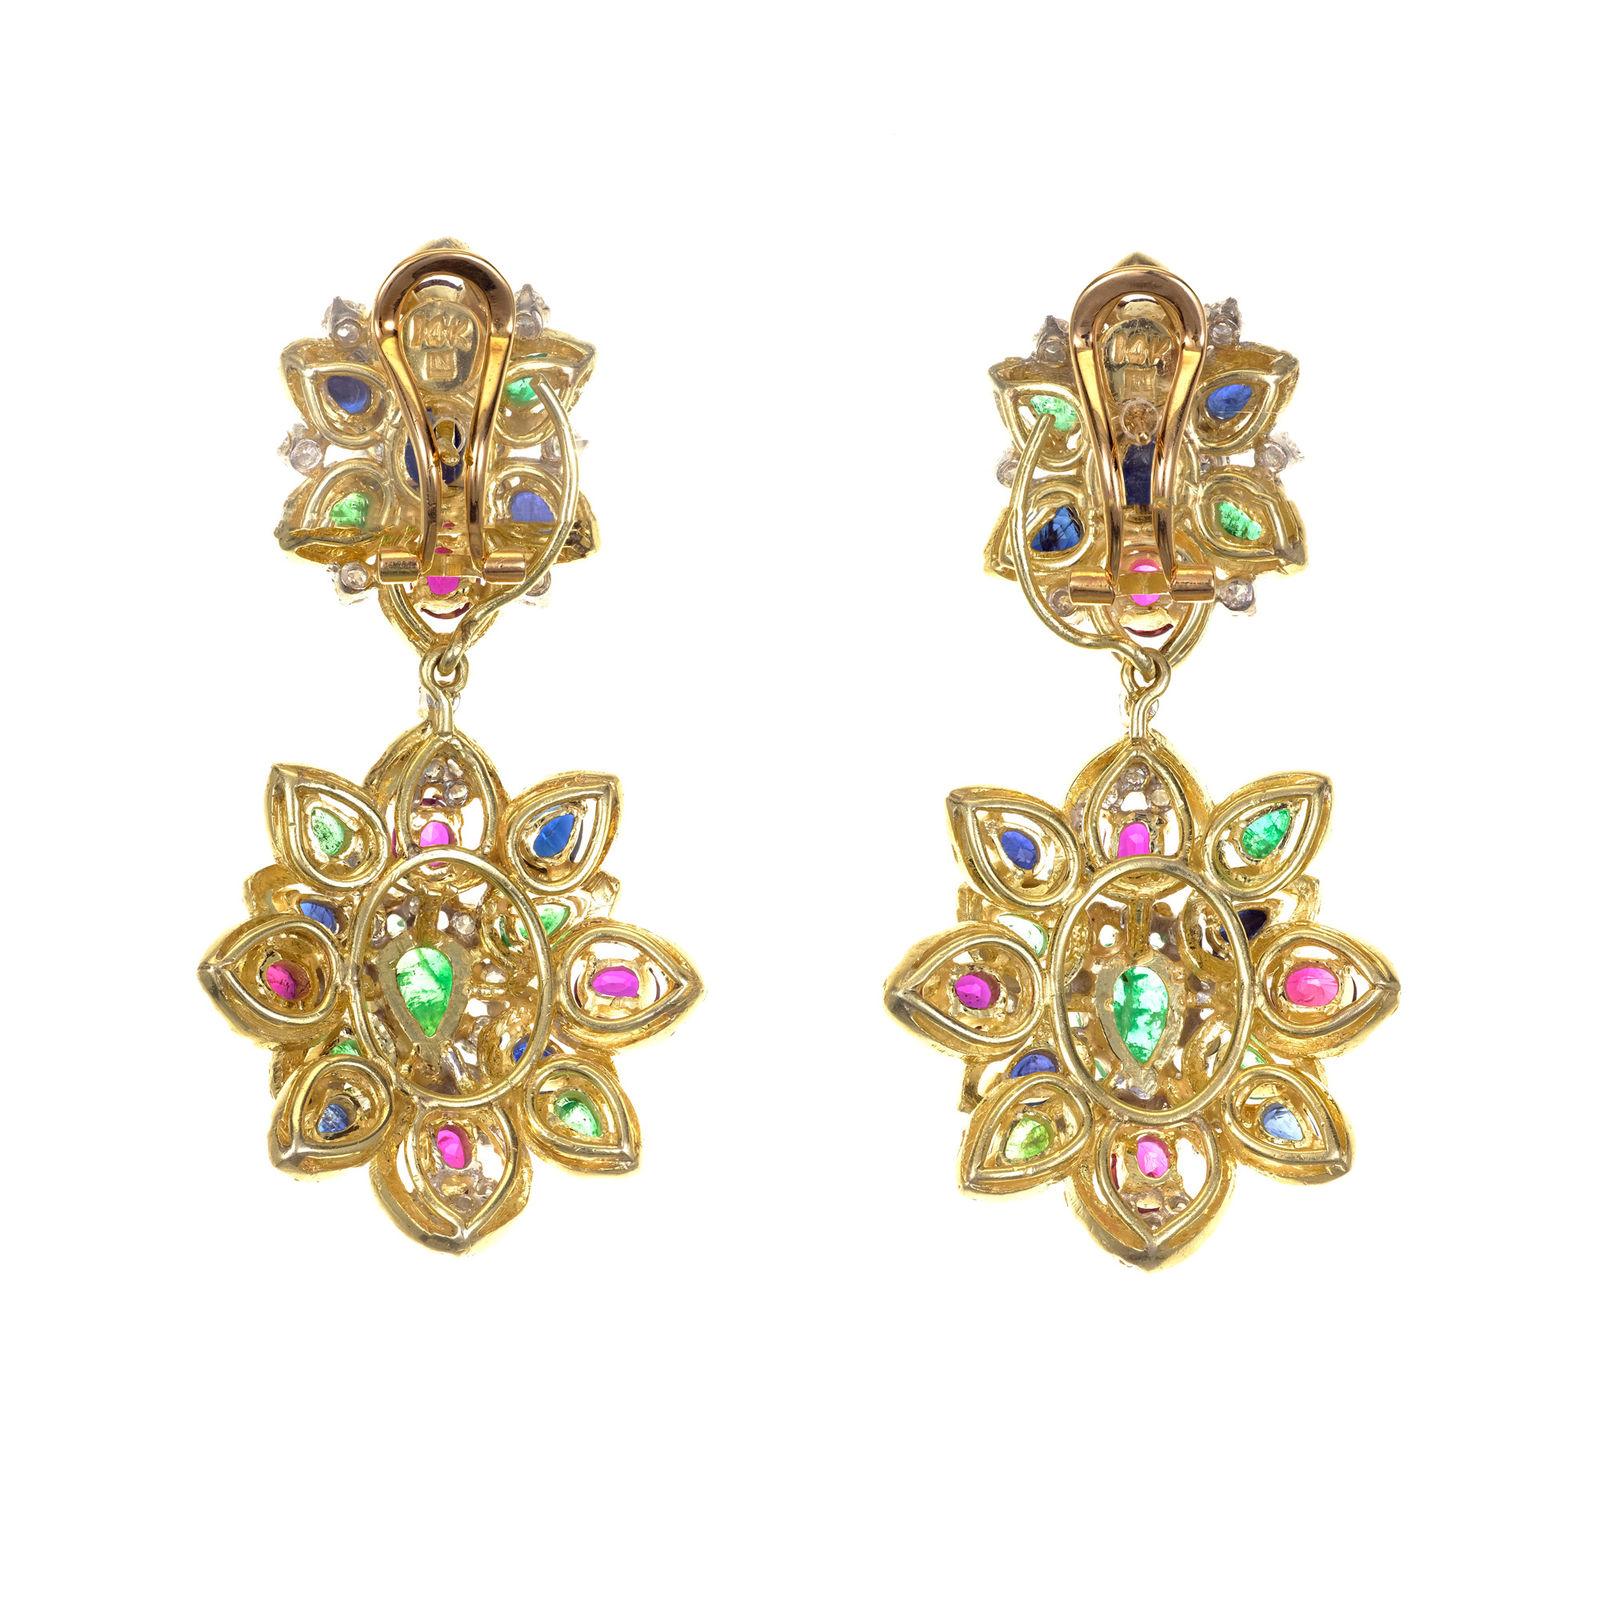 14K day and night cluster dangle earrings with Emeralds, Sapphires, Rubies, and Diamonds. Bottom section may be detached from the tops. One of each colored stones was randomly tested by the GIA. Emeralds test natural, no enhancement. Sapphires test